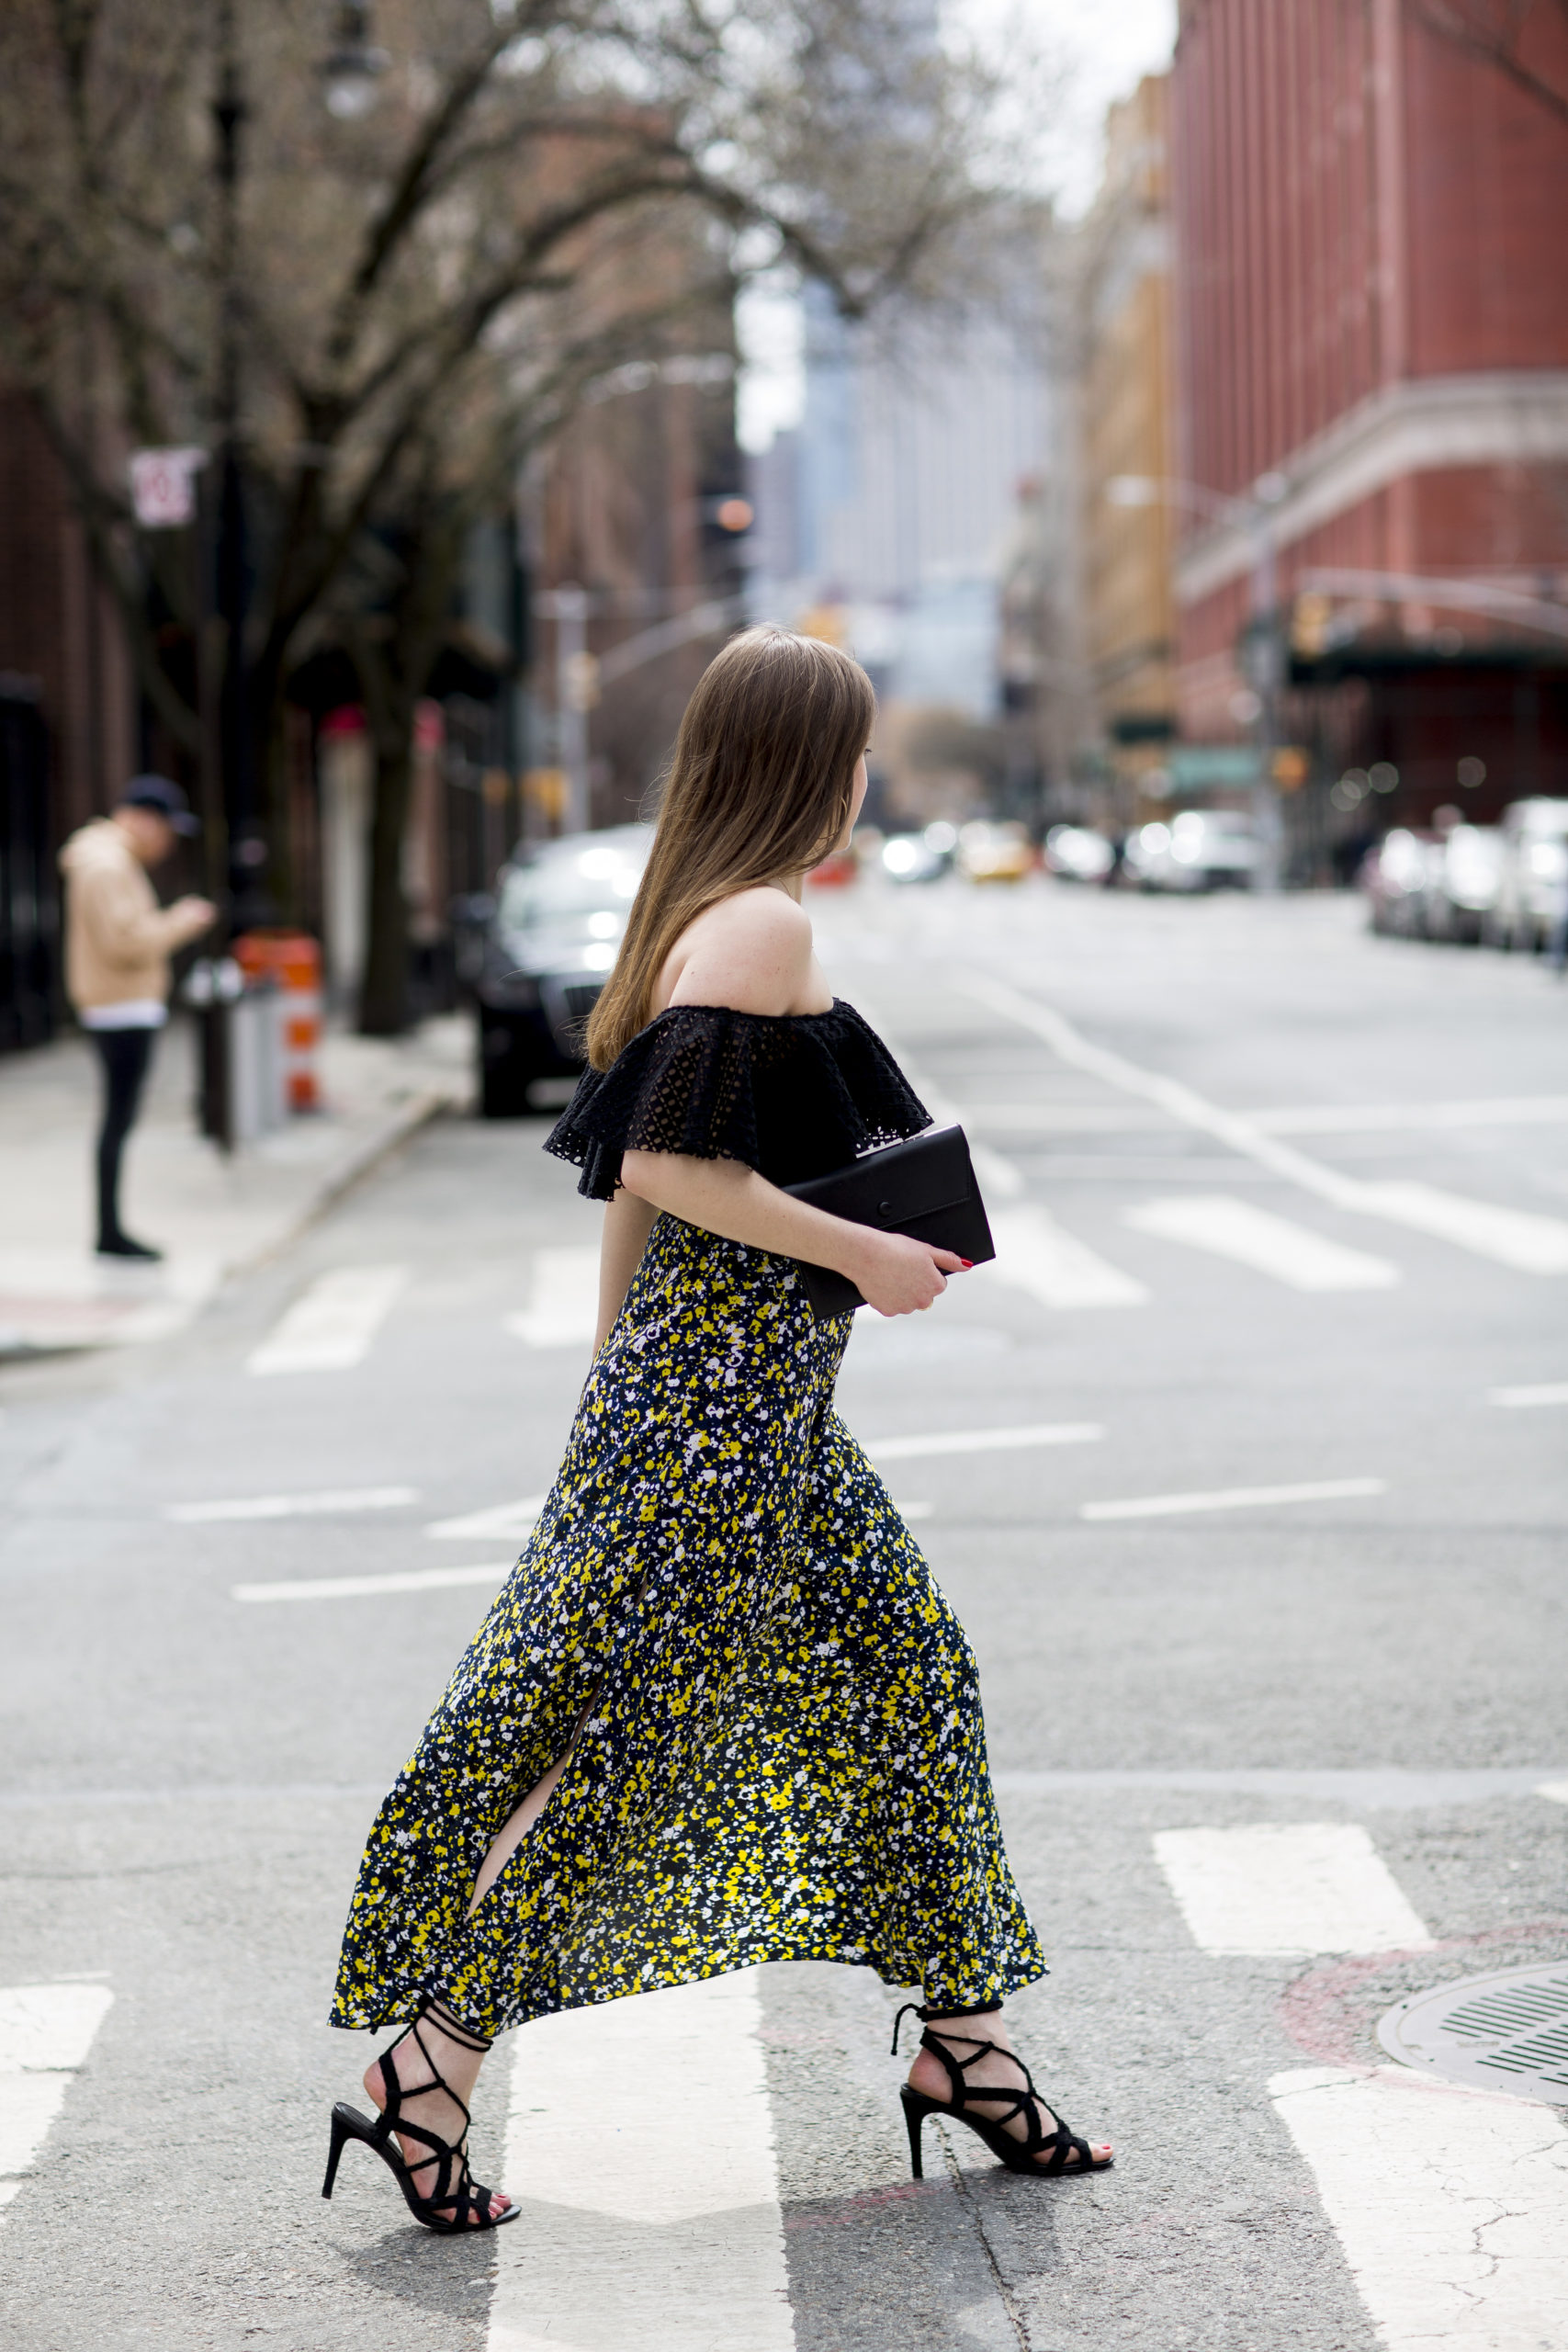 Woman walking across a crosswalk in NYC. She has brown straight hair and is wearing an off-the-shoulder black eyelet top, a printed black, yellow and blue skirt with slits and black heels